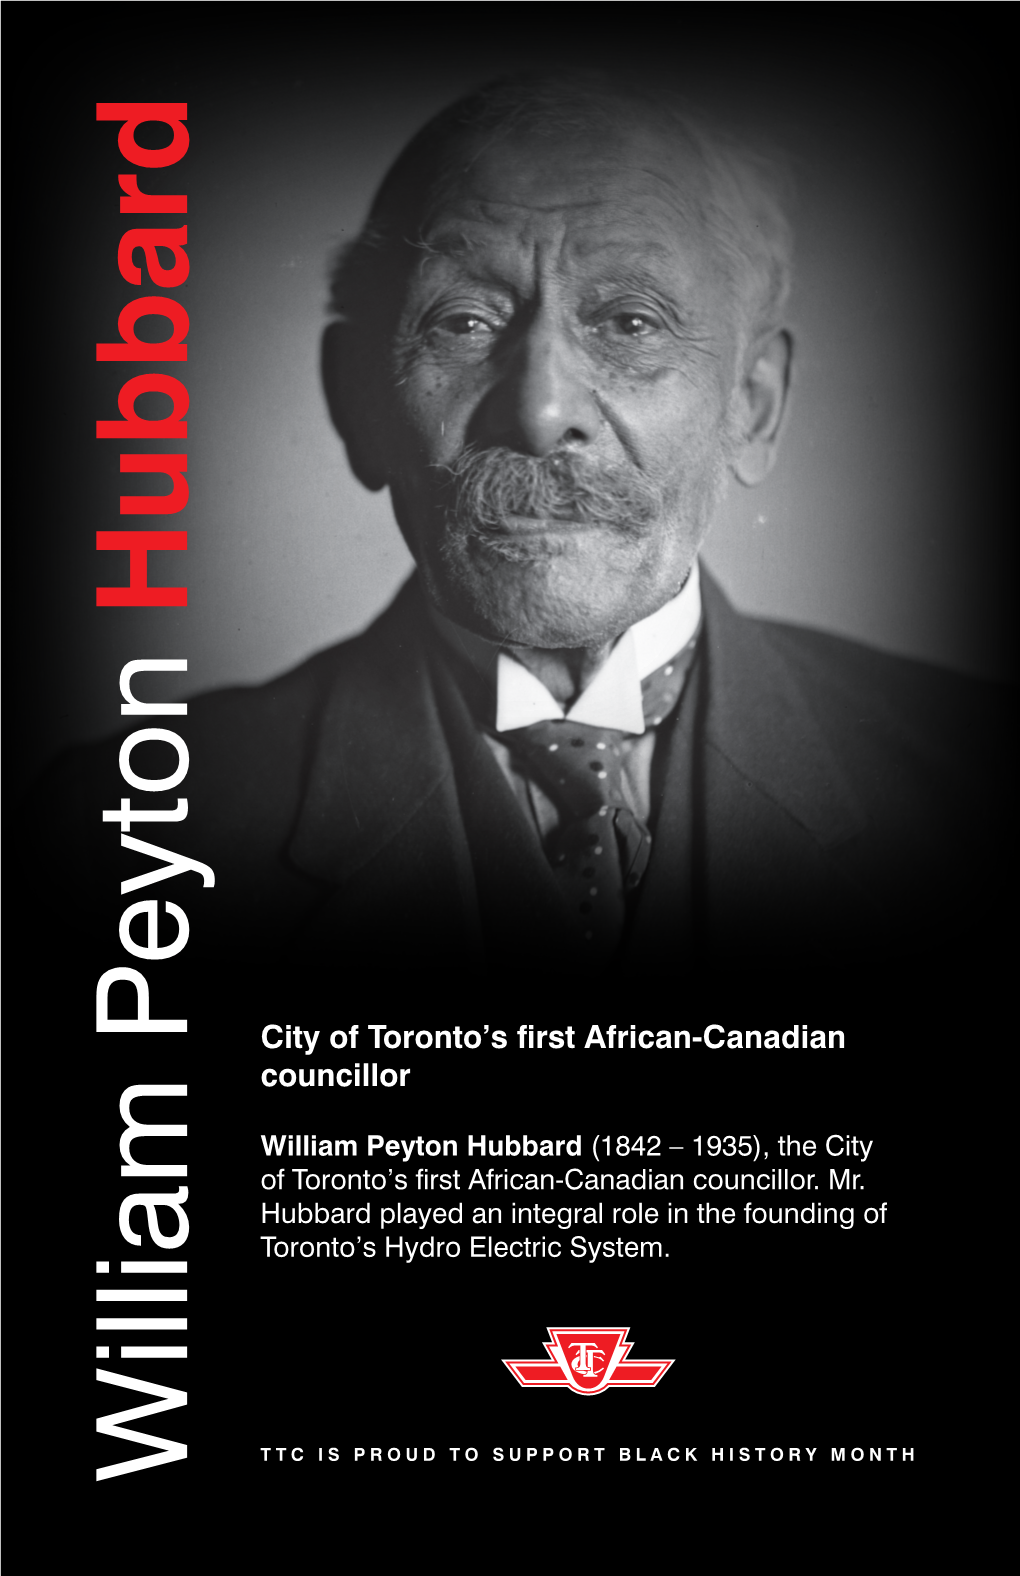 City of Toronto's First African-Canadian Councillor